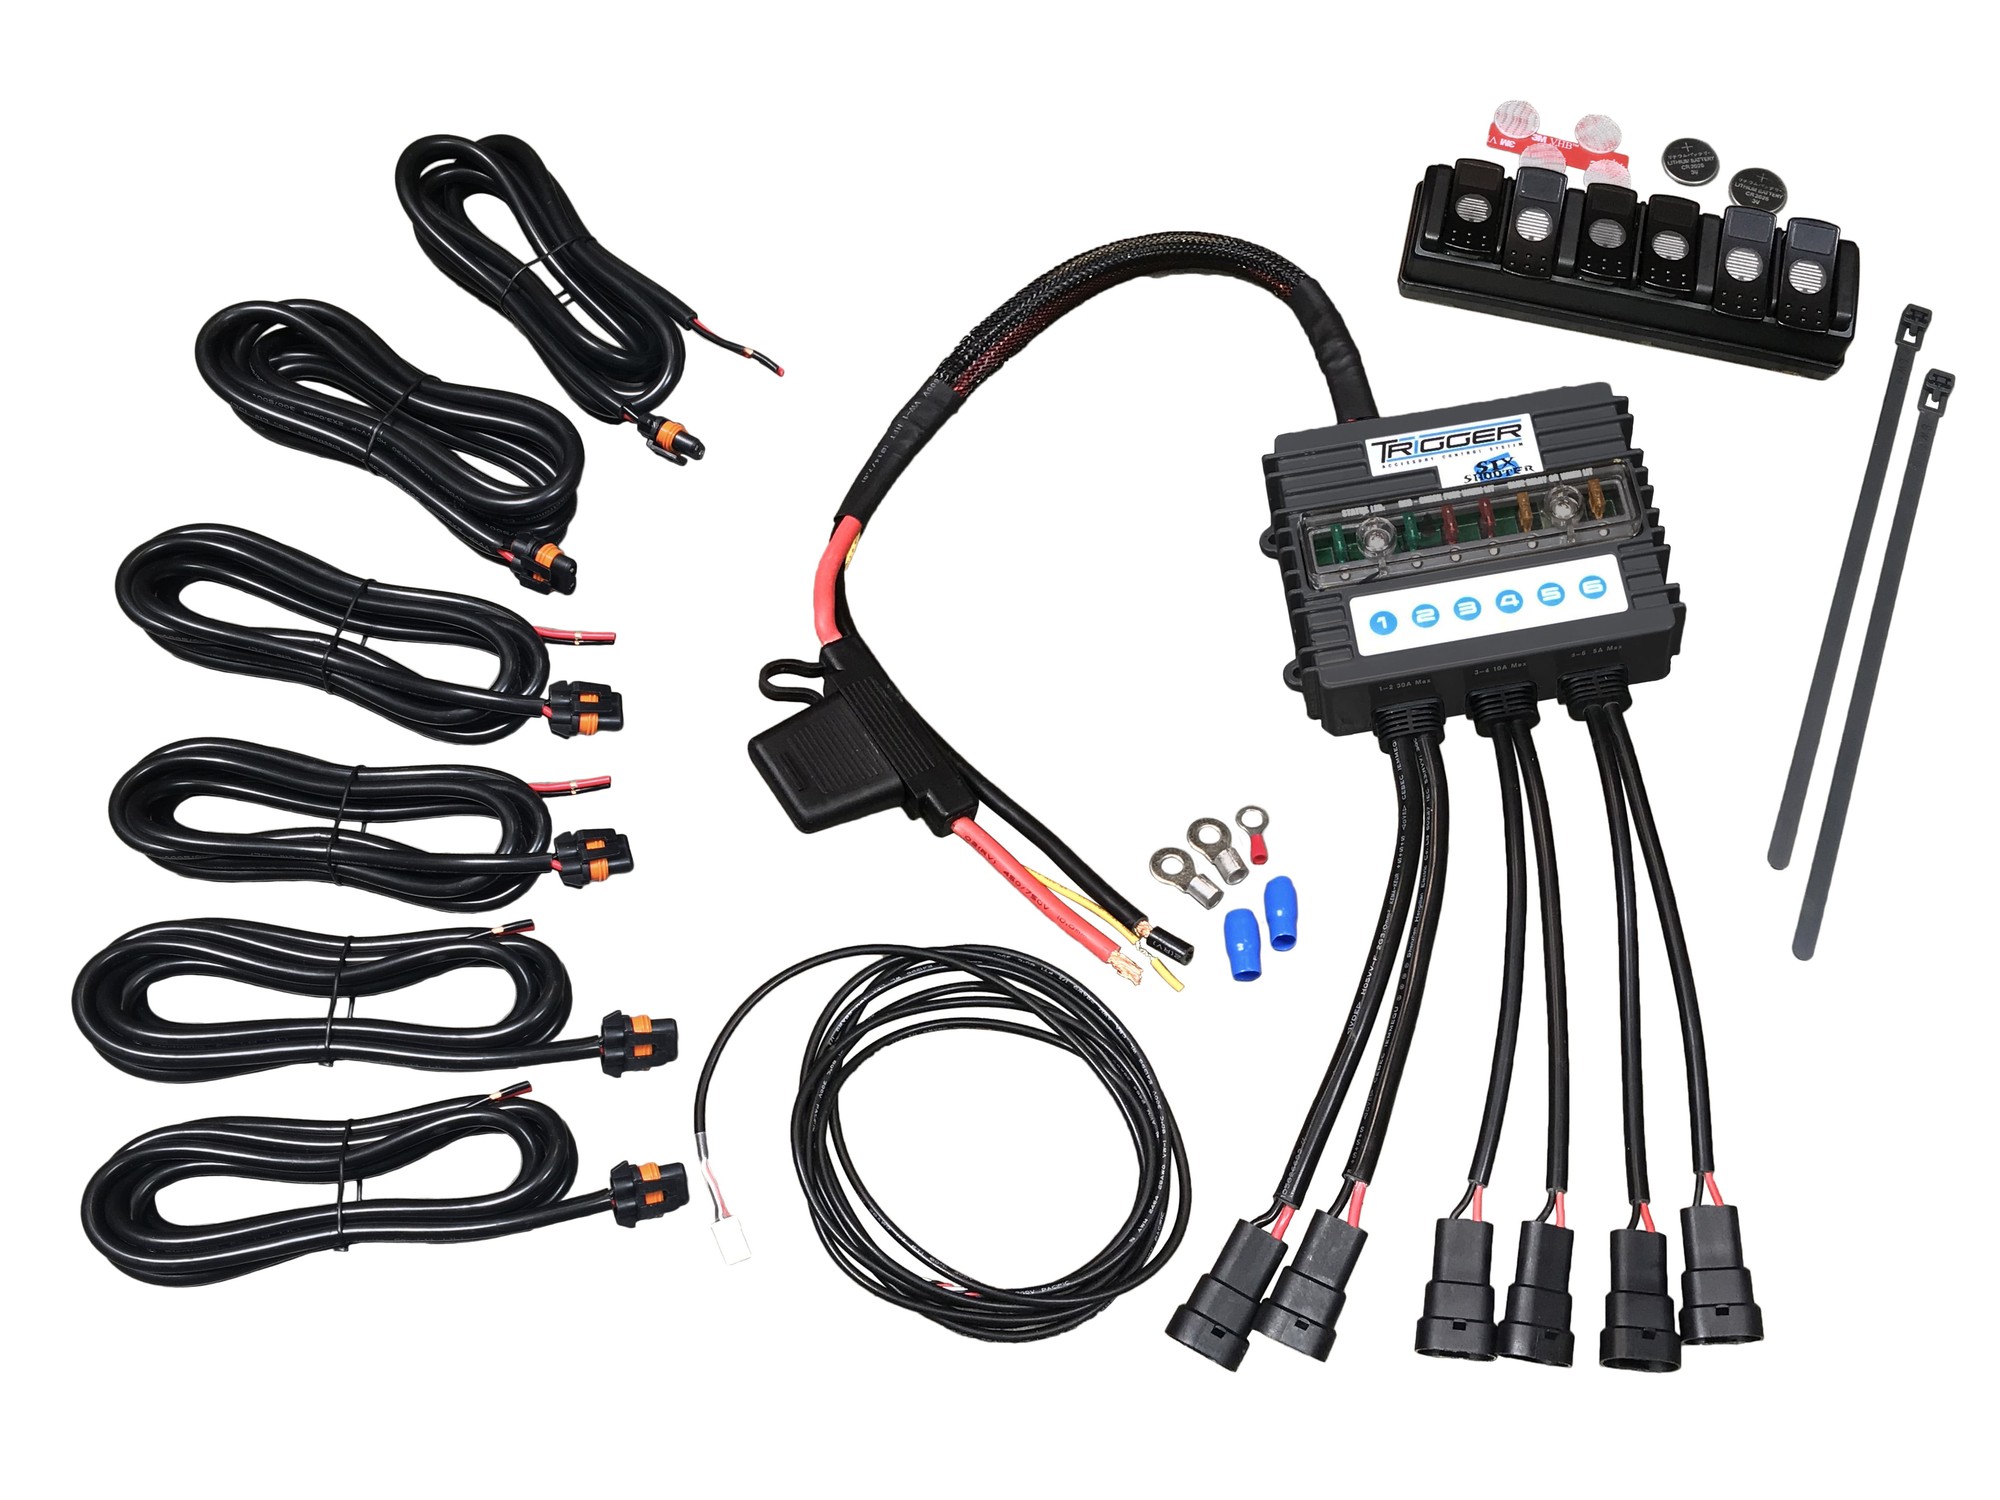 6 CHANNEL TRIGGER SYSTEM WITH RELAY. HARNESS & RF/BLUETOOTH WIRELESS REMOTE